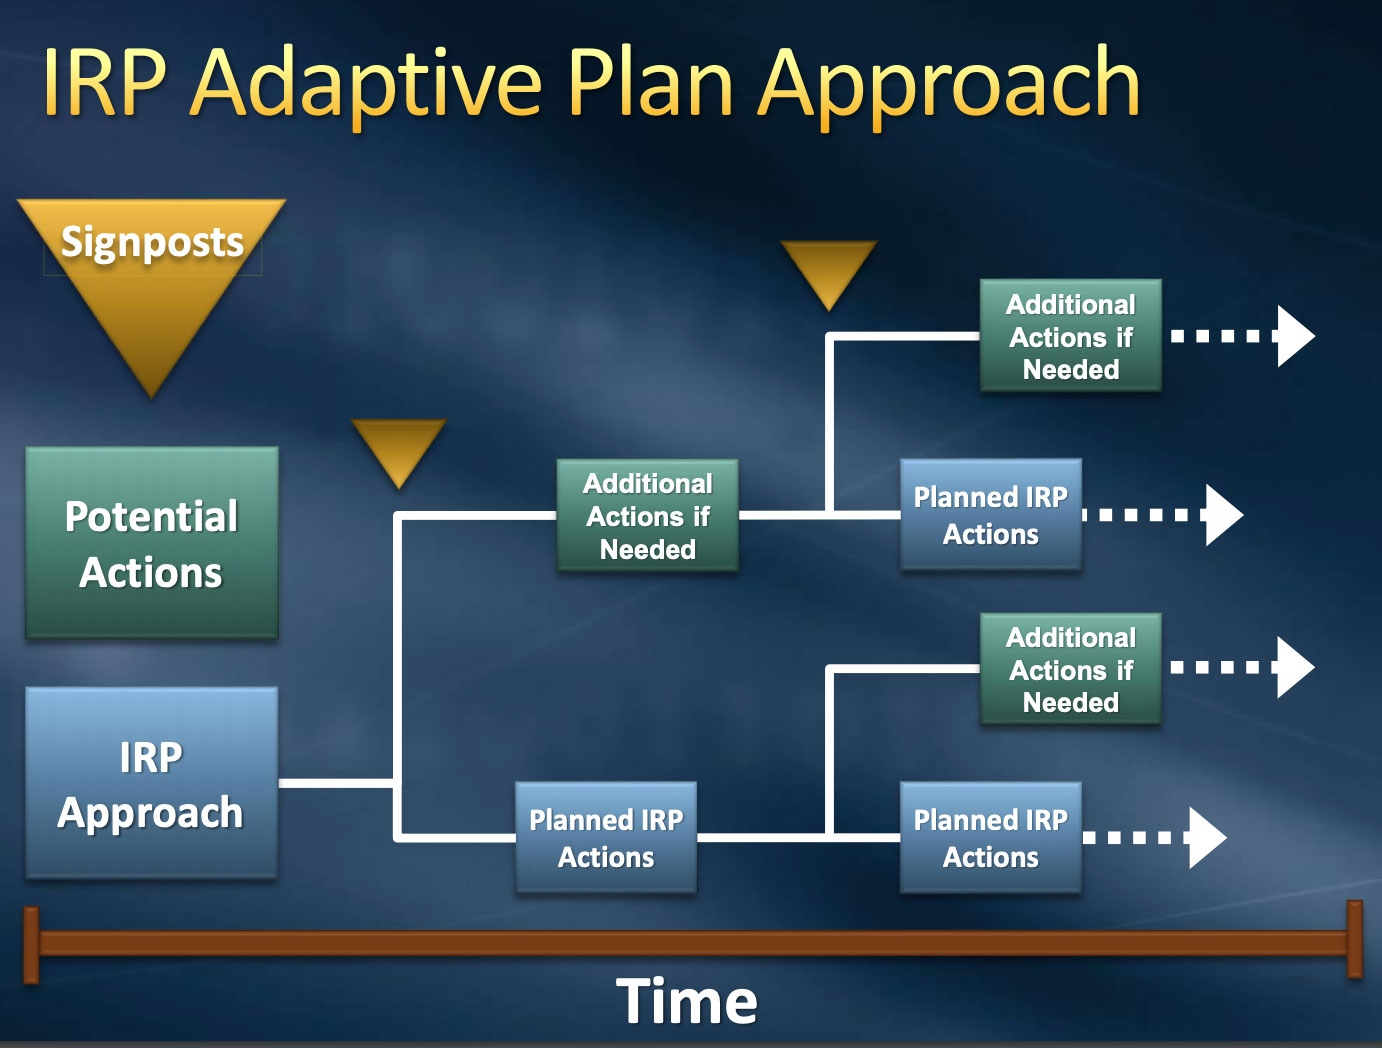 For a description of the IRP Adaptive Plan Approach flowchart, call Keely Brooks at 702-822-3349.